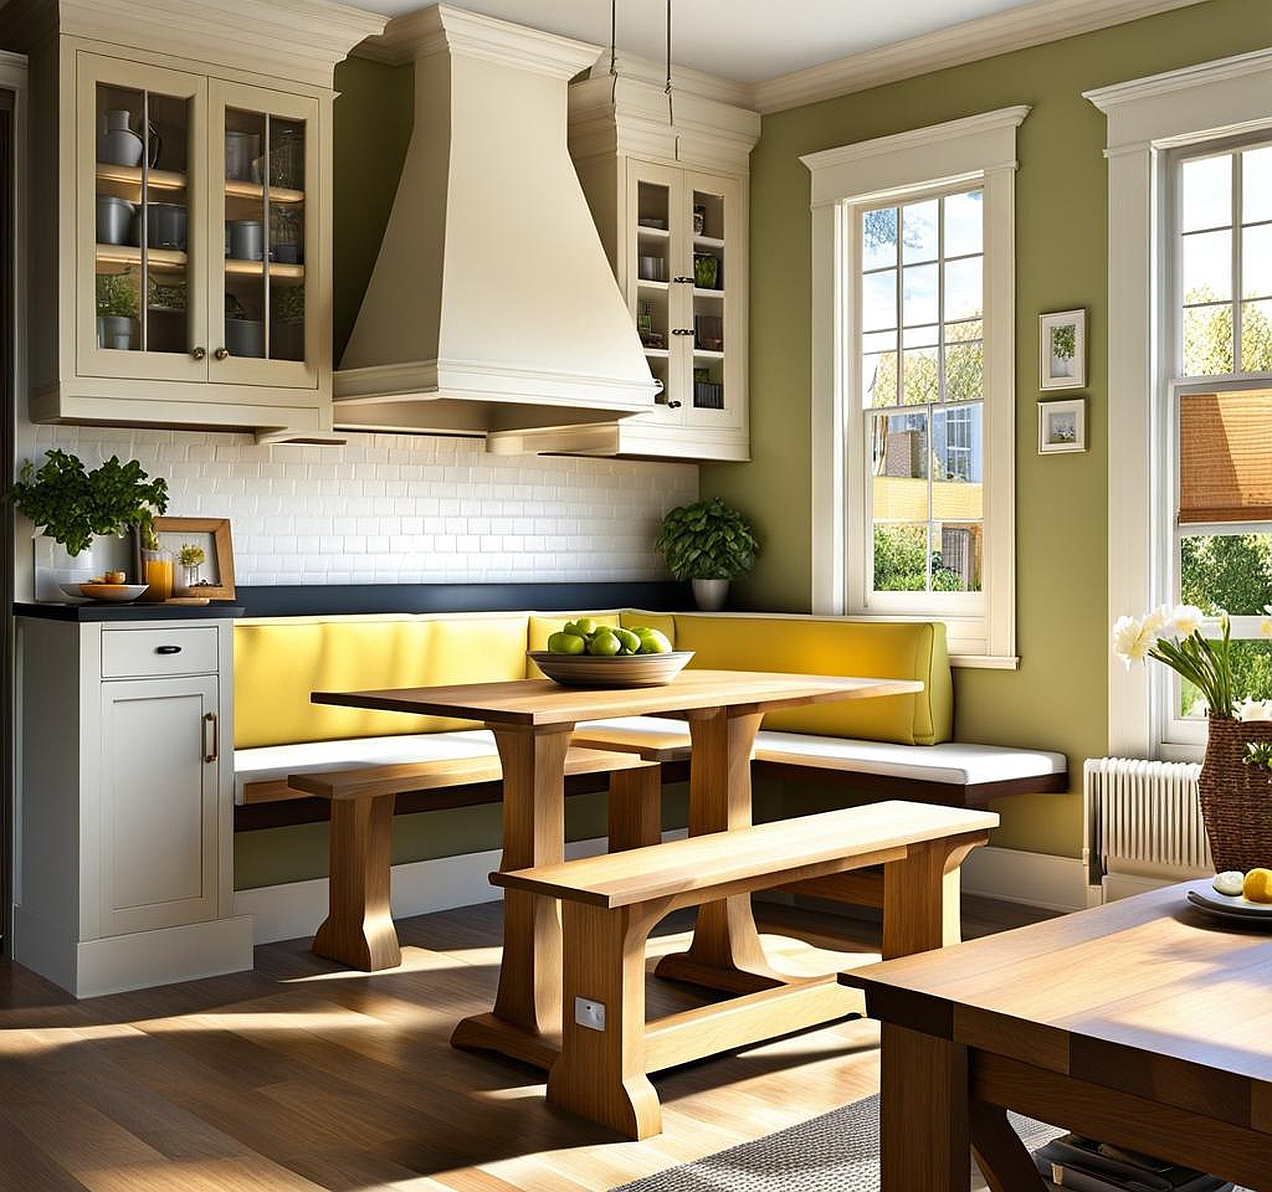 Designing Beautiful Small Kitchen Bench Seating for Efficiency